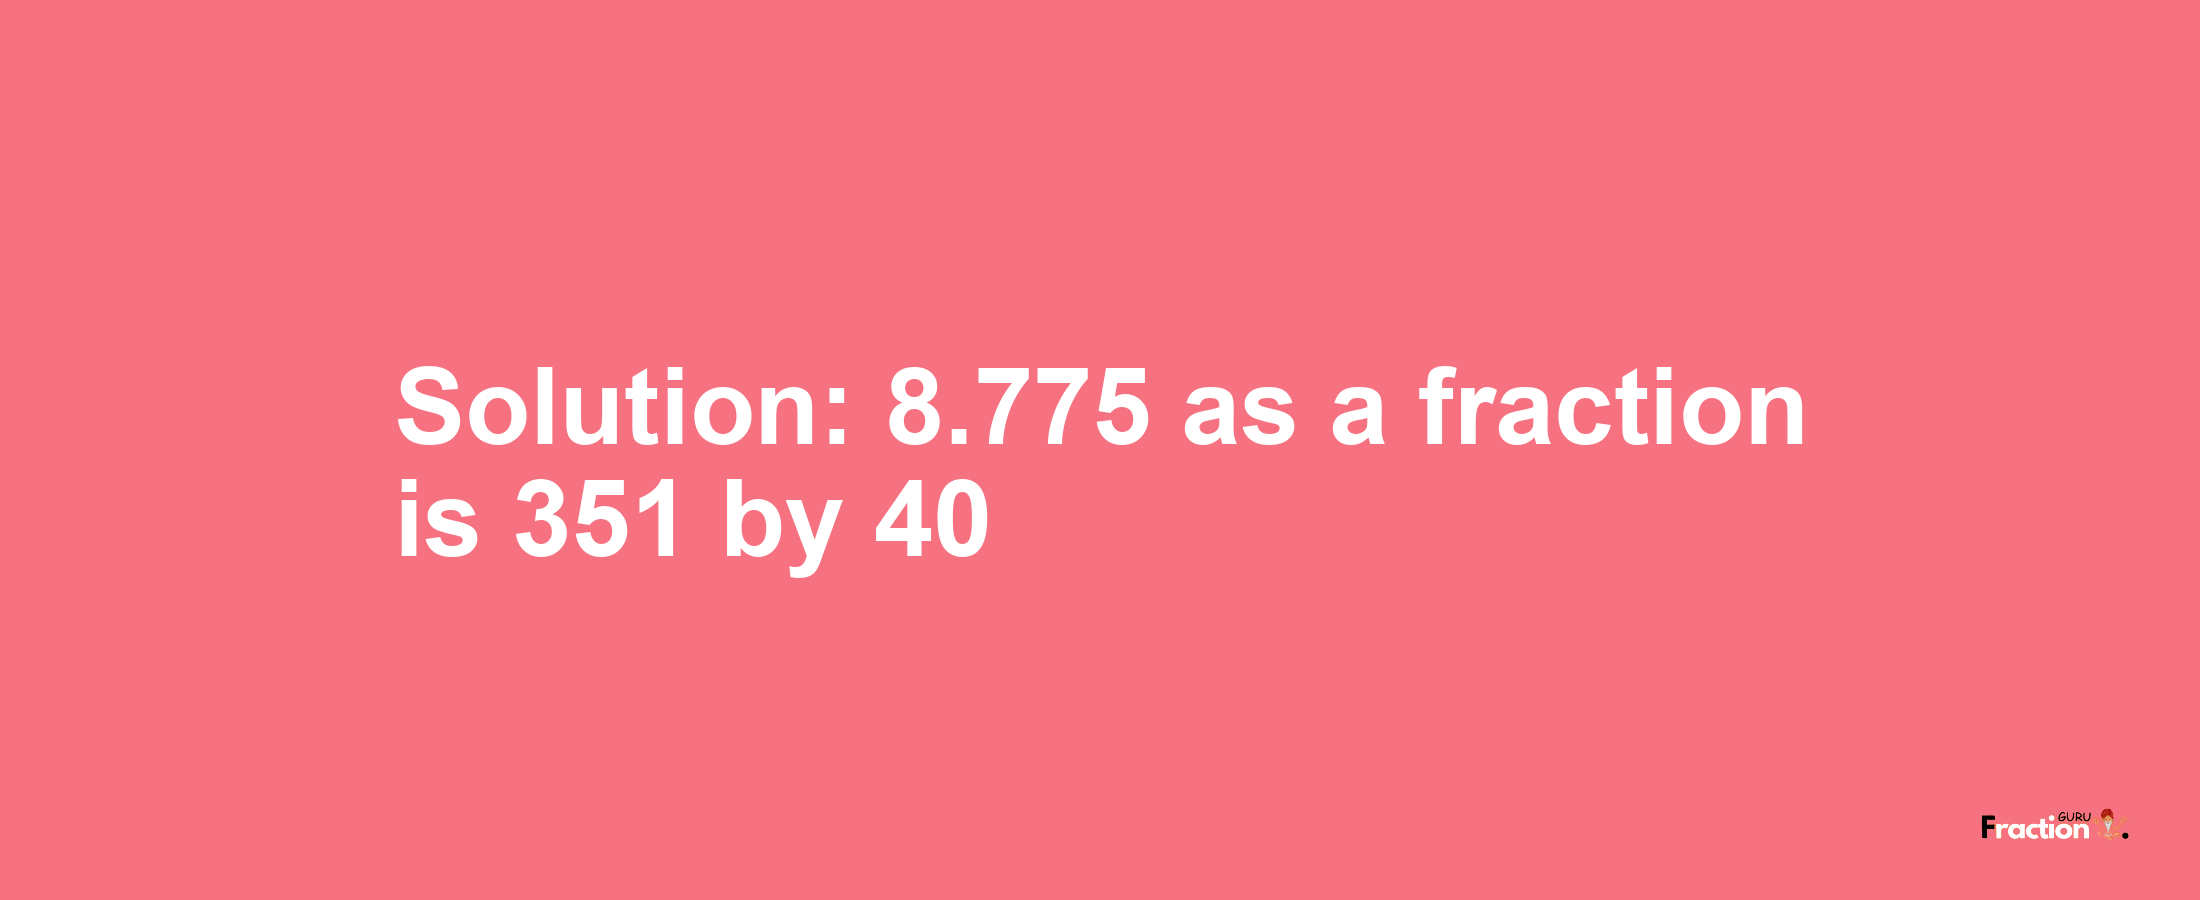 Solution:8.775 as a fraction is 351/40